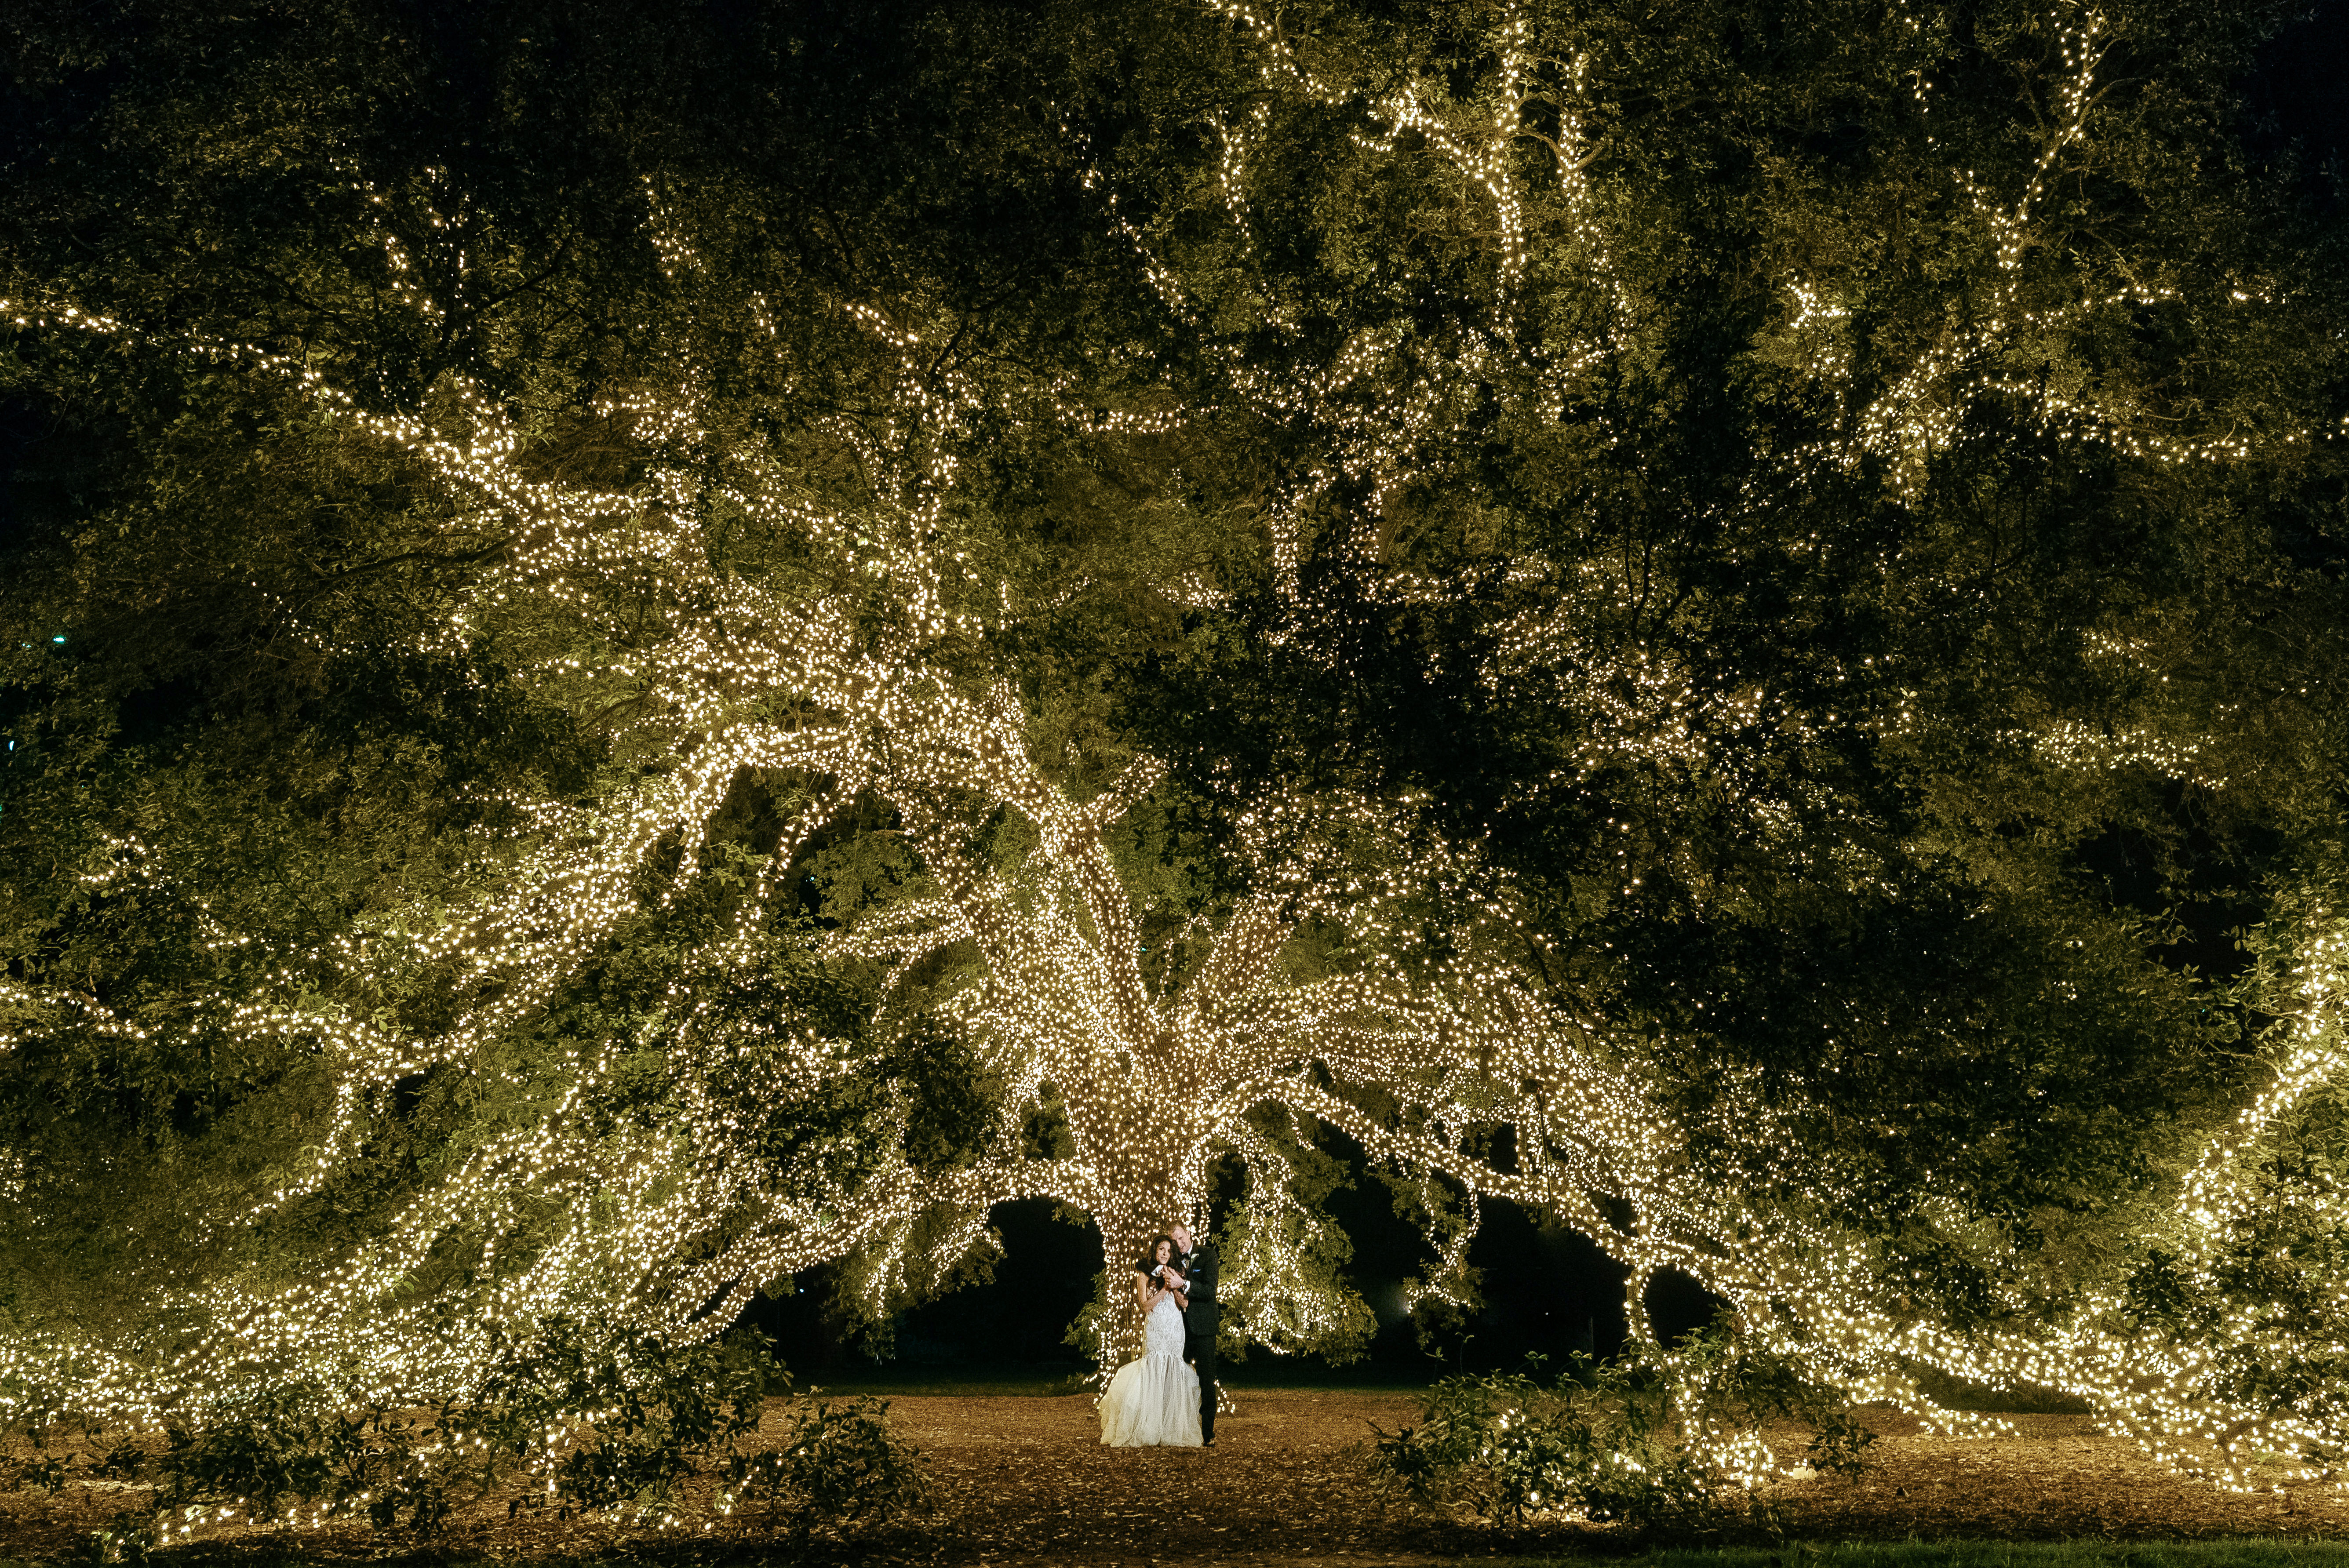 A bride and groom stand a the trunk of a large oak tree with lights wrapped around its branches at the wedding venue, Houstonian Hotel, Club & Spa.